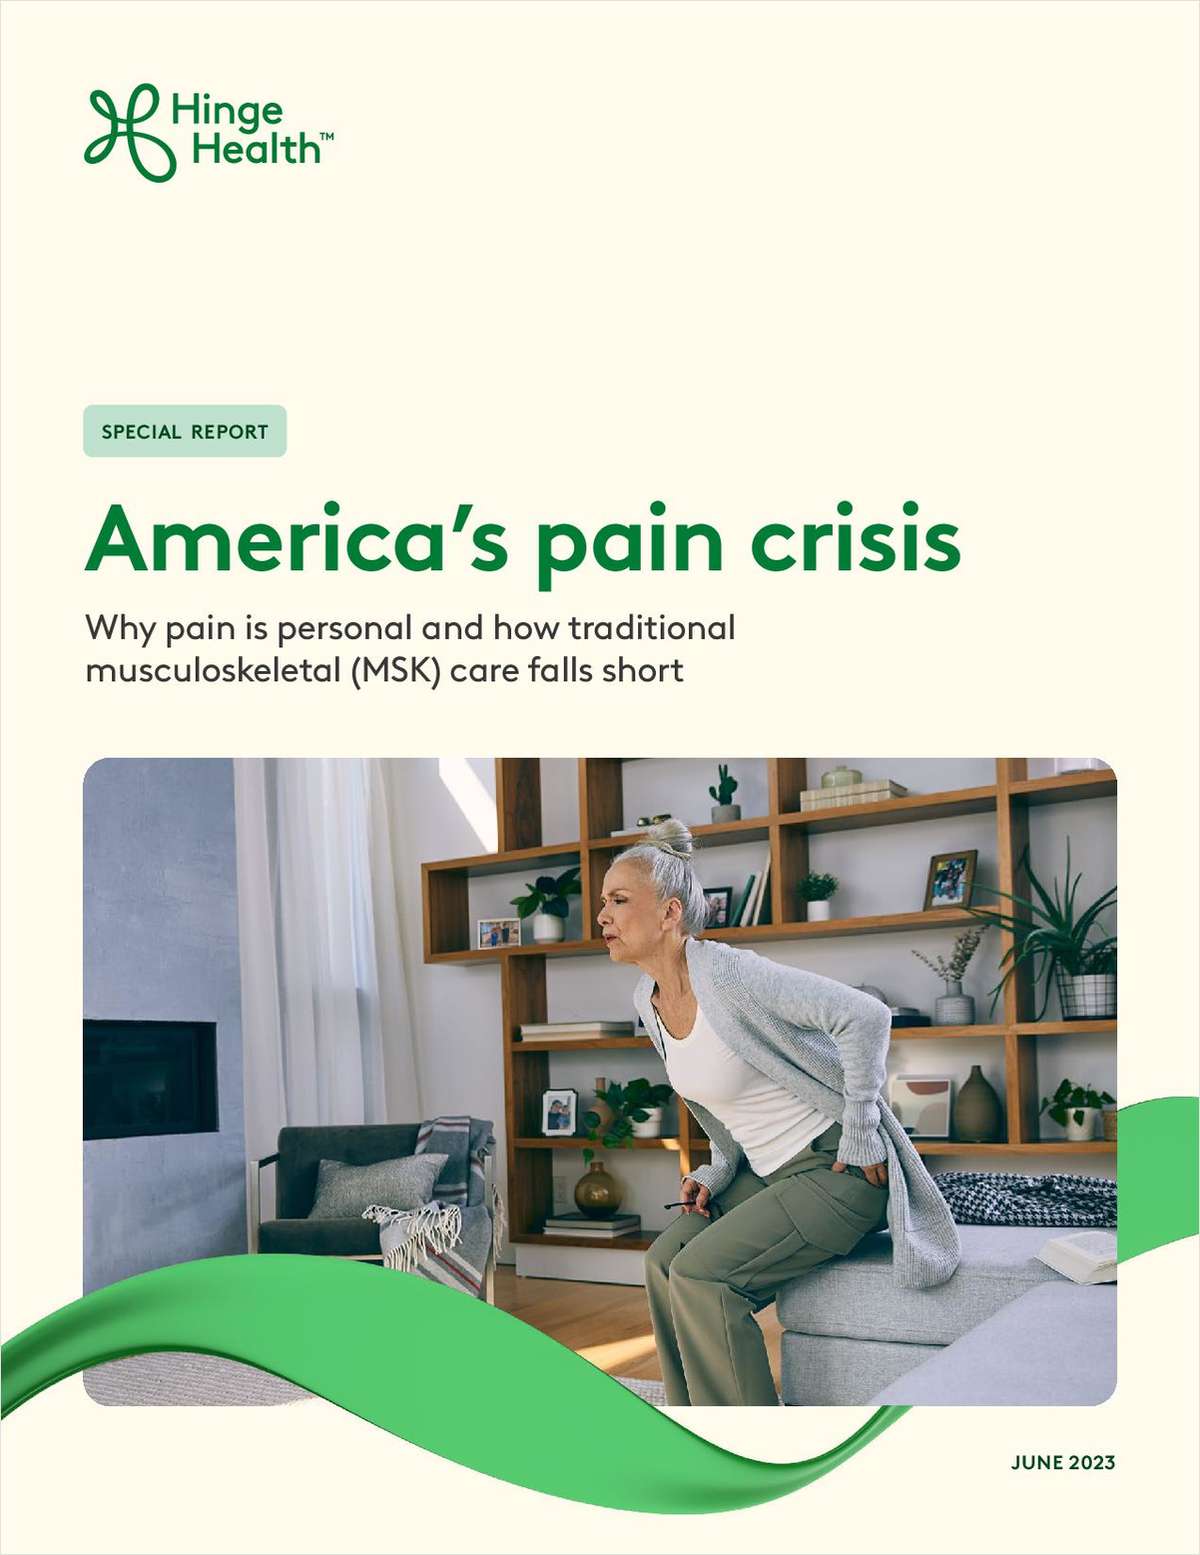 America's pain crisis: Pain is Personal and Traditional Musculoskeletal Care is Falling Short link